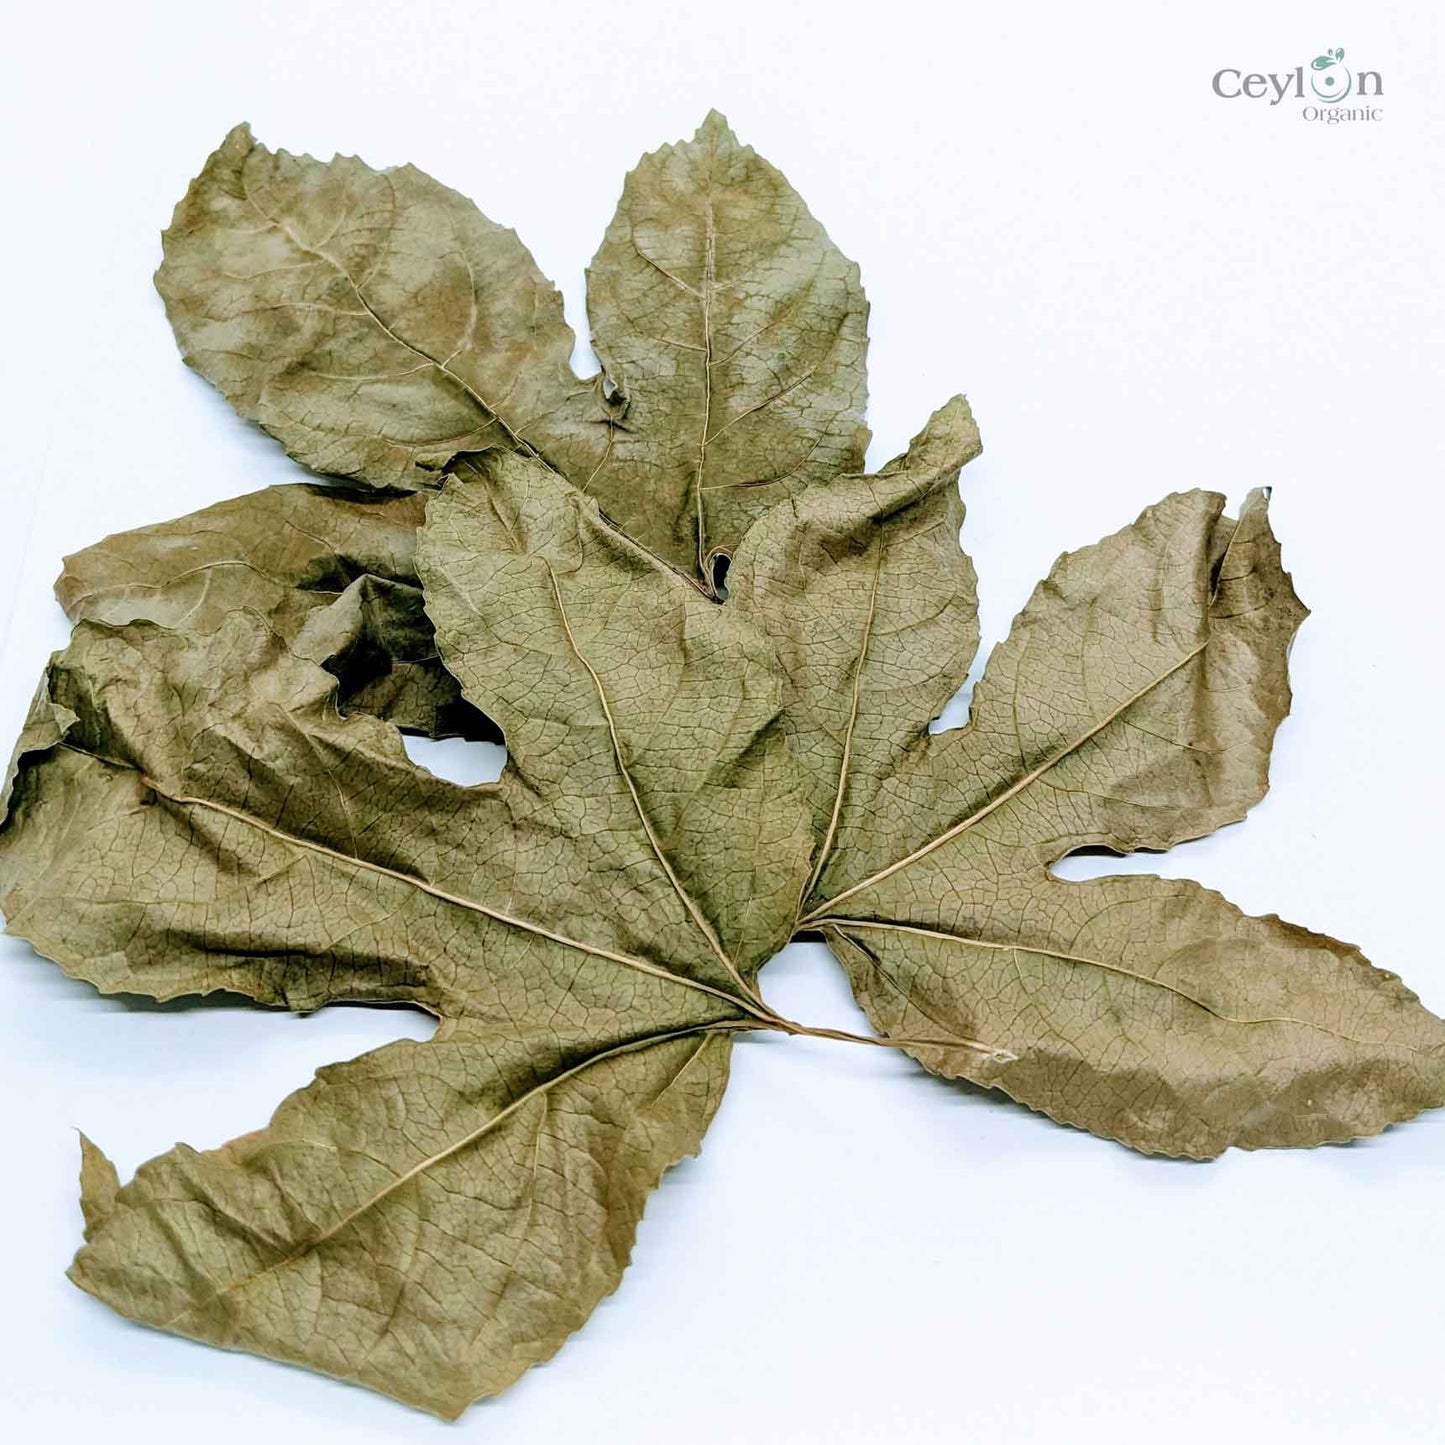 500+ Passion Fruit,Dried Passion Fruit Leaves,Dried Natural Passion Fruit Leaves | Ceylon organic-5